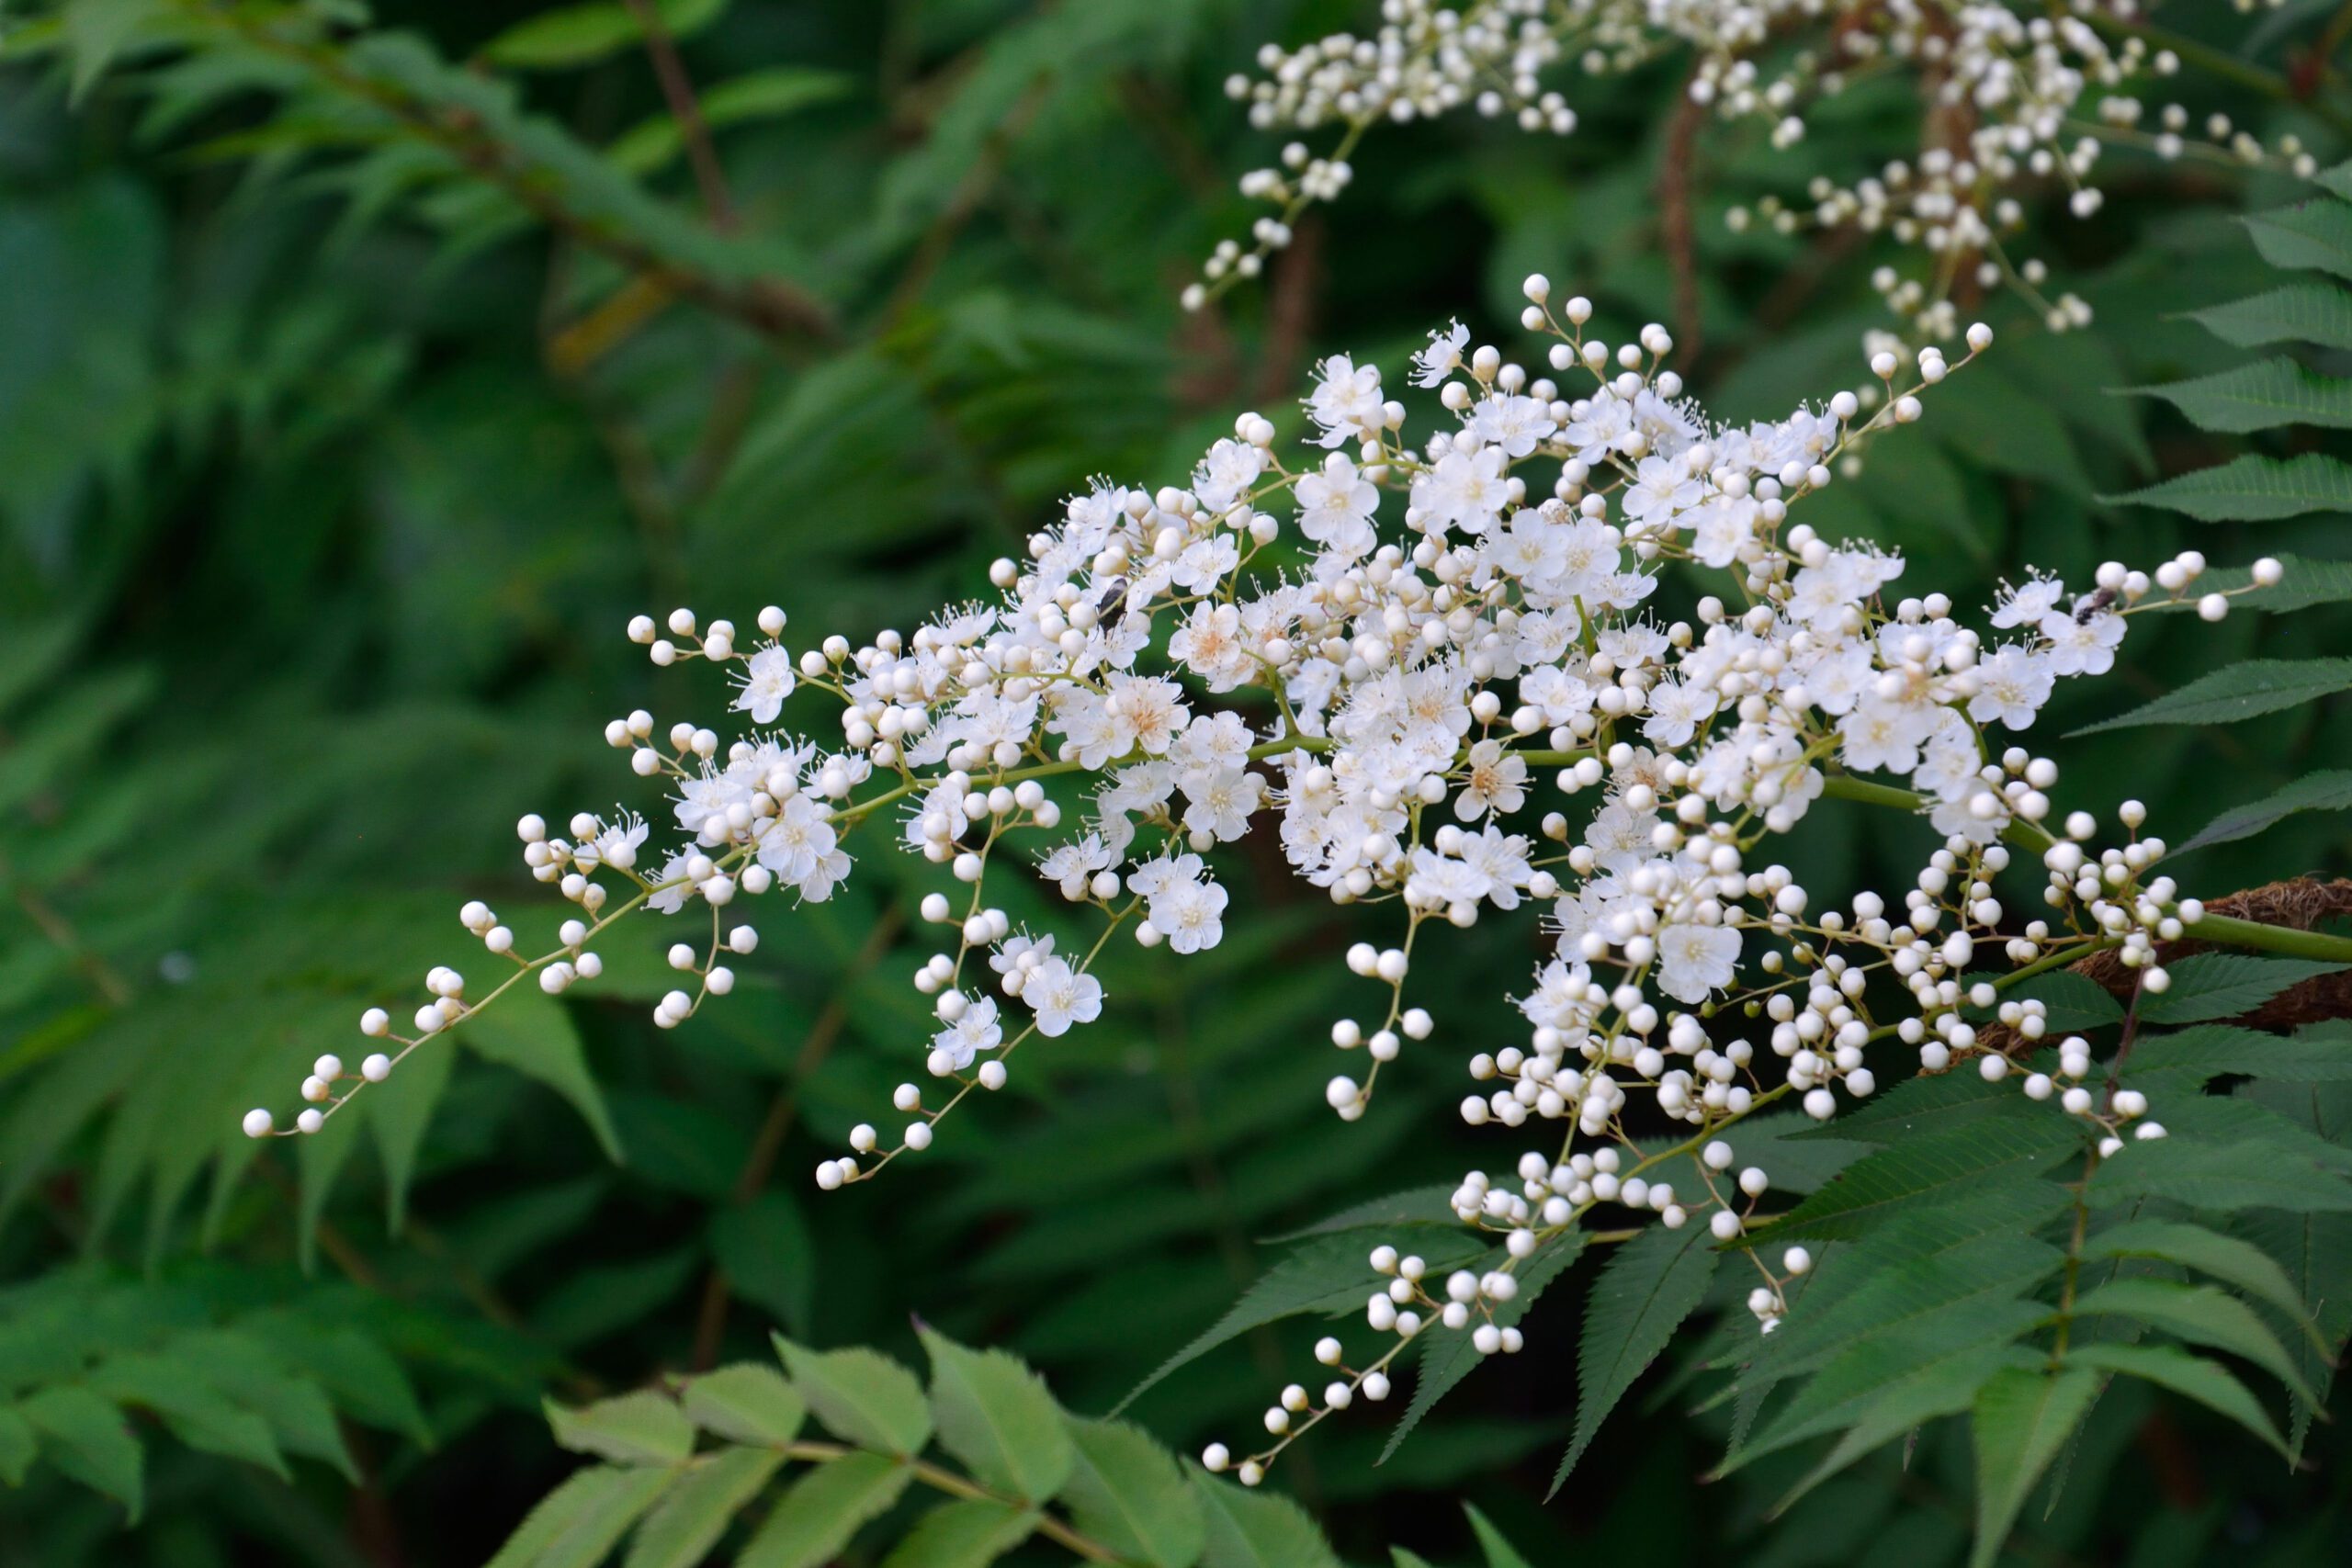 Sorbus commixta green leaves and white flowers